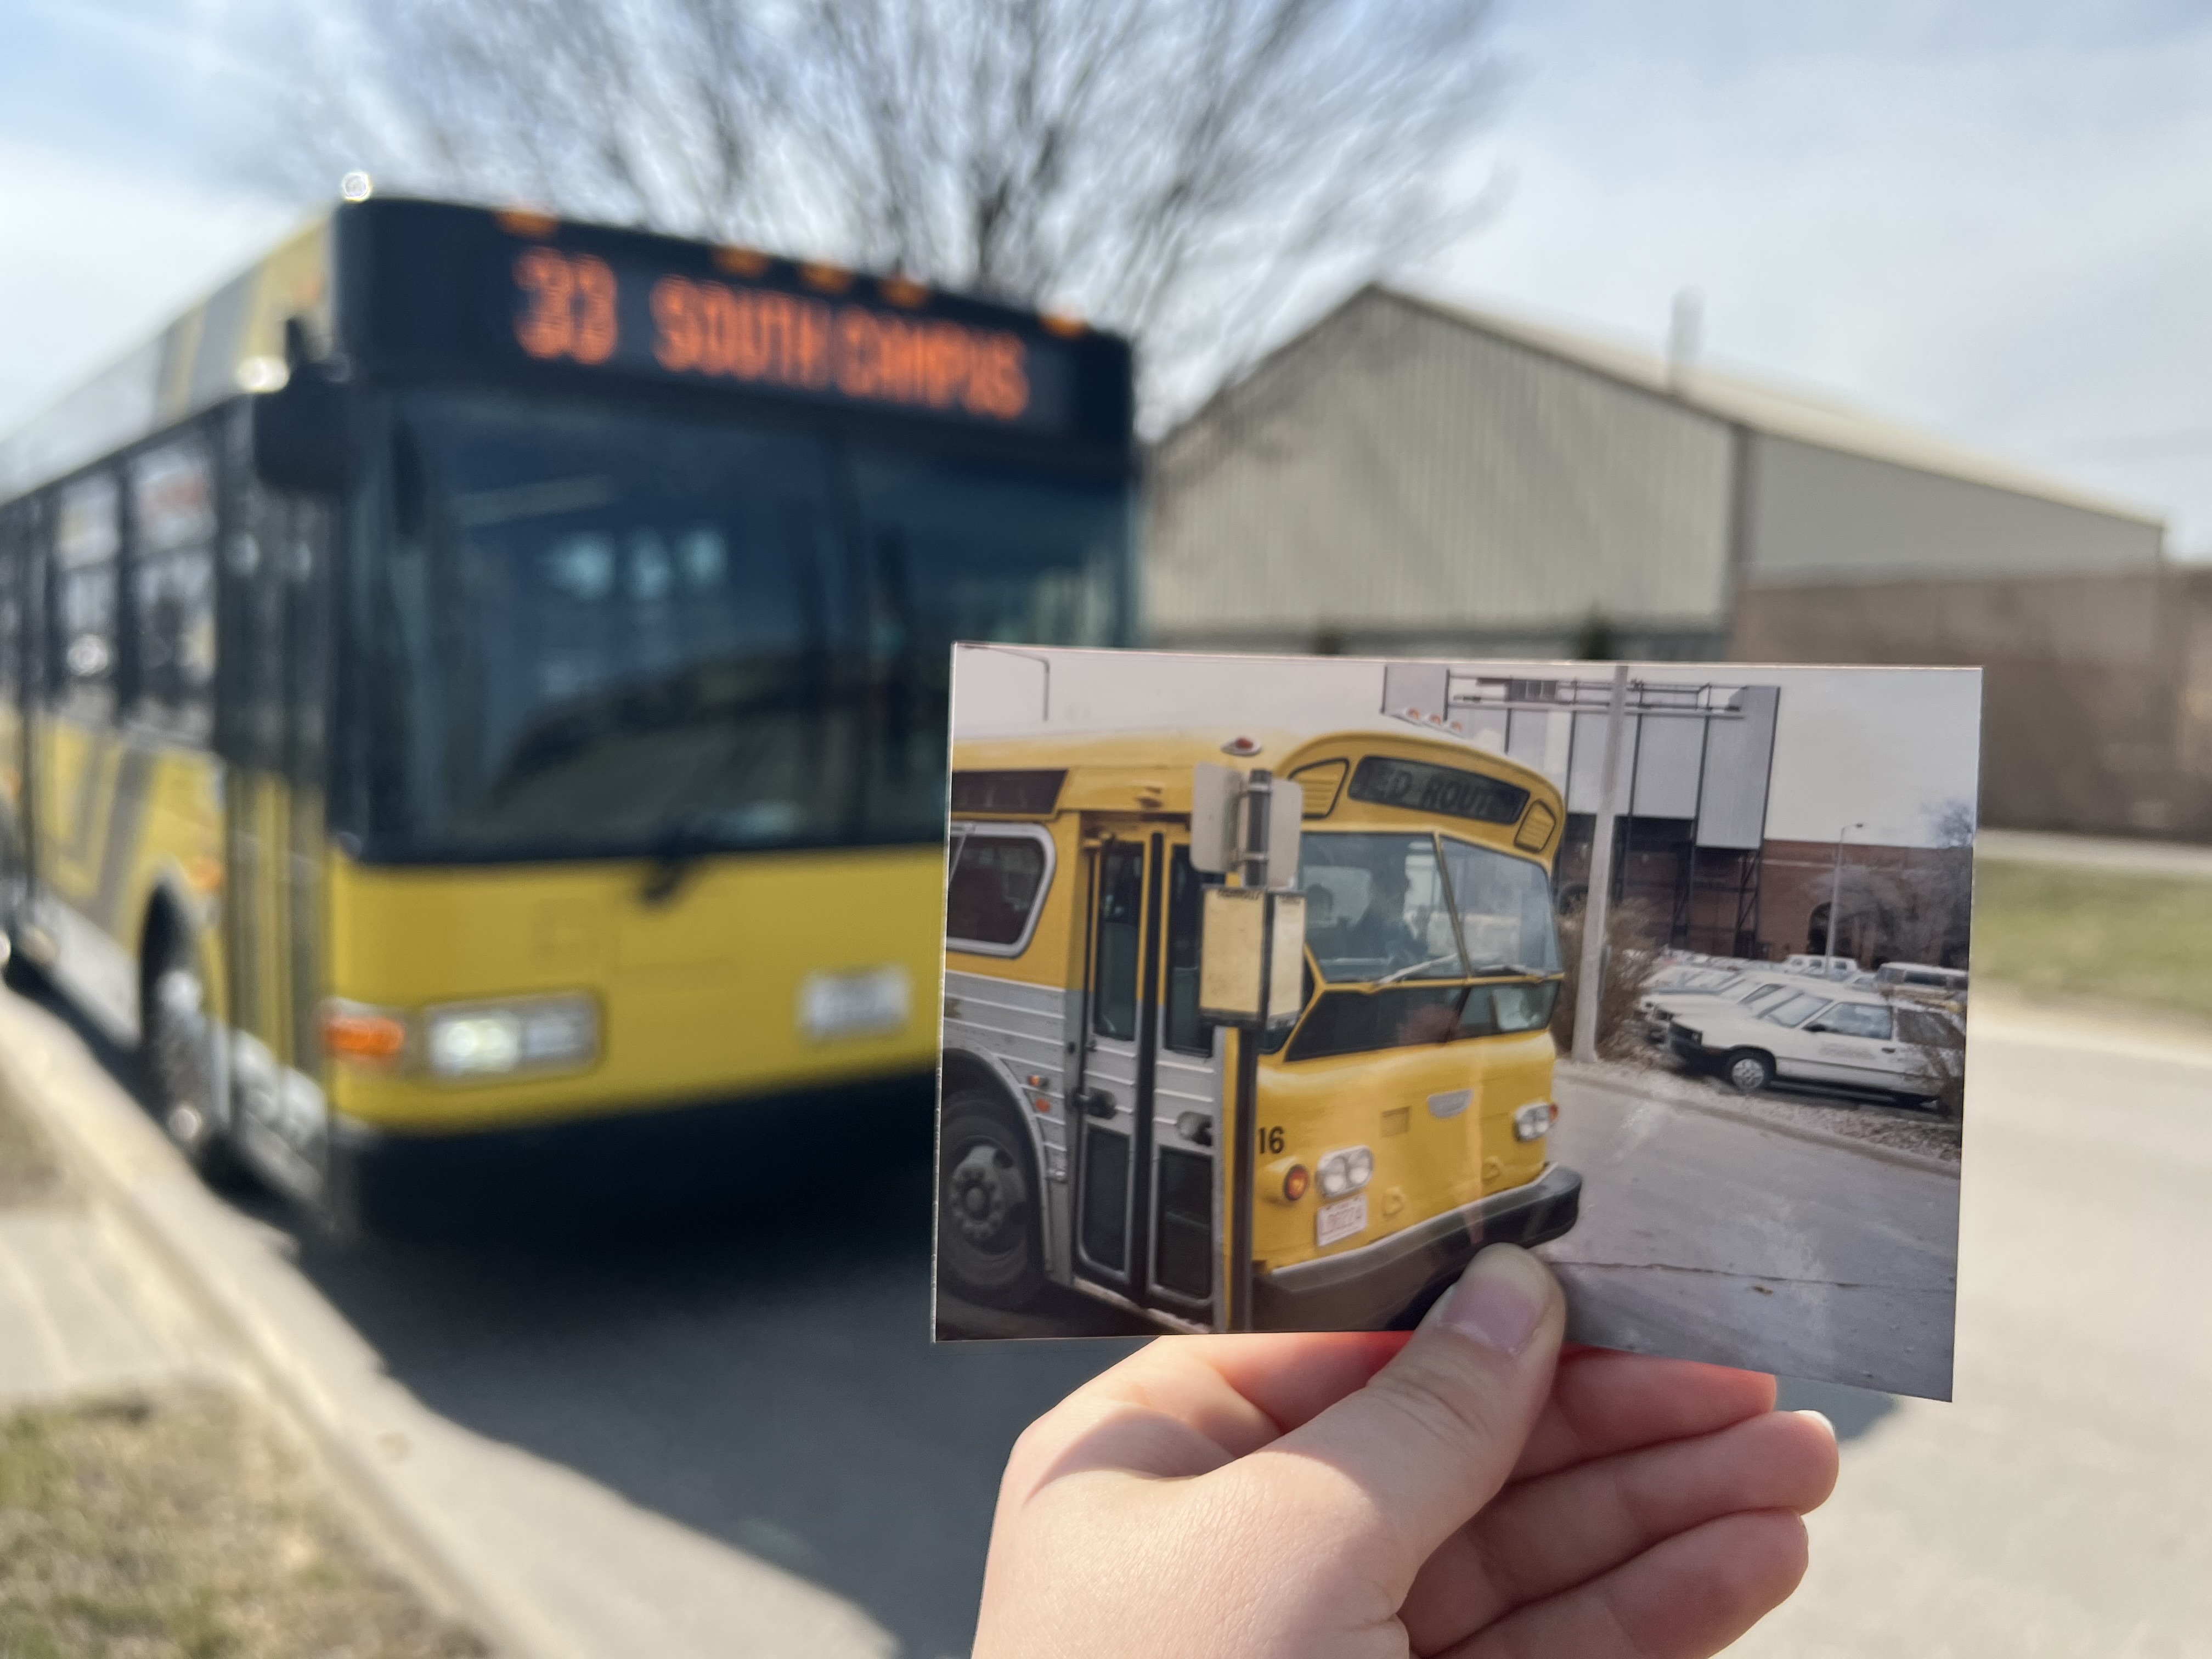 A photo of a 1977 bus is held up in front of a CAMBUS in 2022